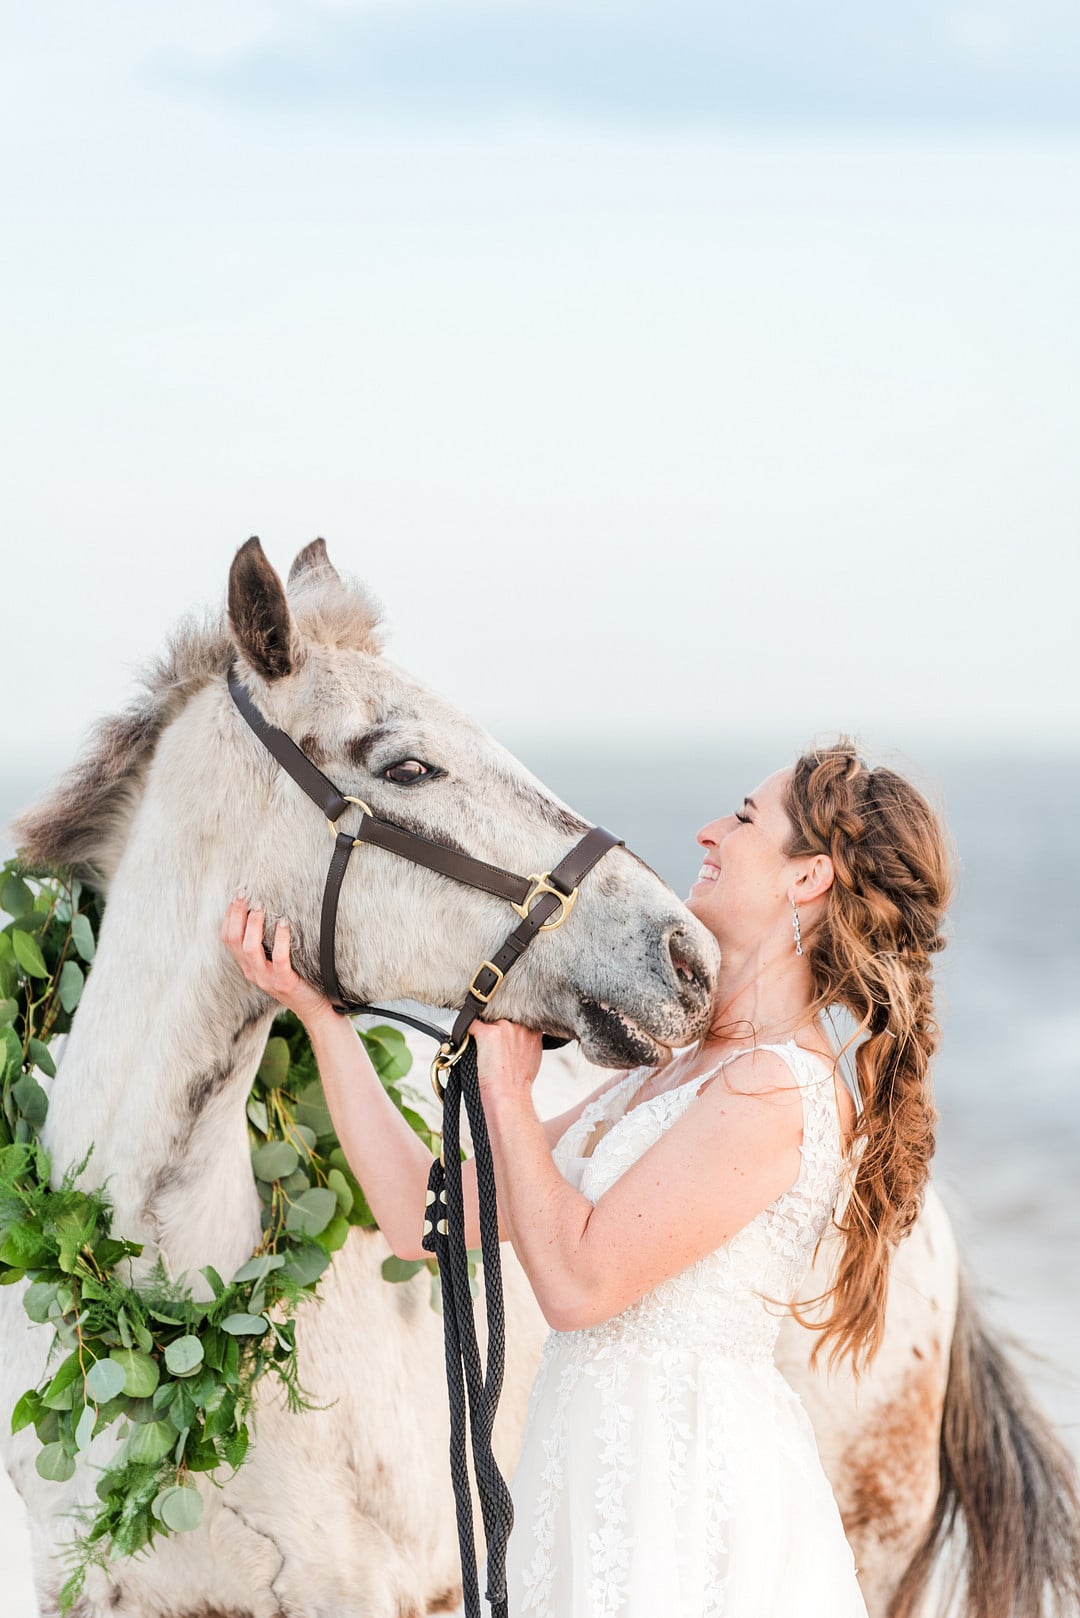 Romantic, Spring Styled Wedding with Horses on the Beach_Christine Austin Photography_©christineaustinphotography_2021_RomanticBeachStyledShoot_Horses_80_low